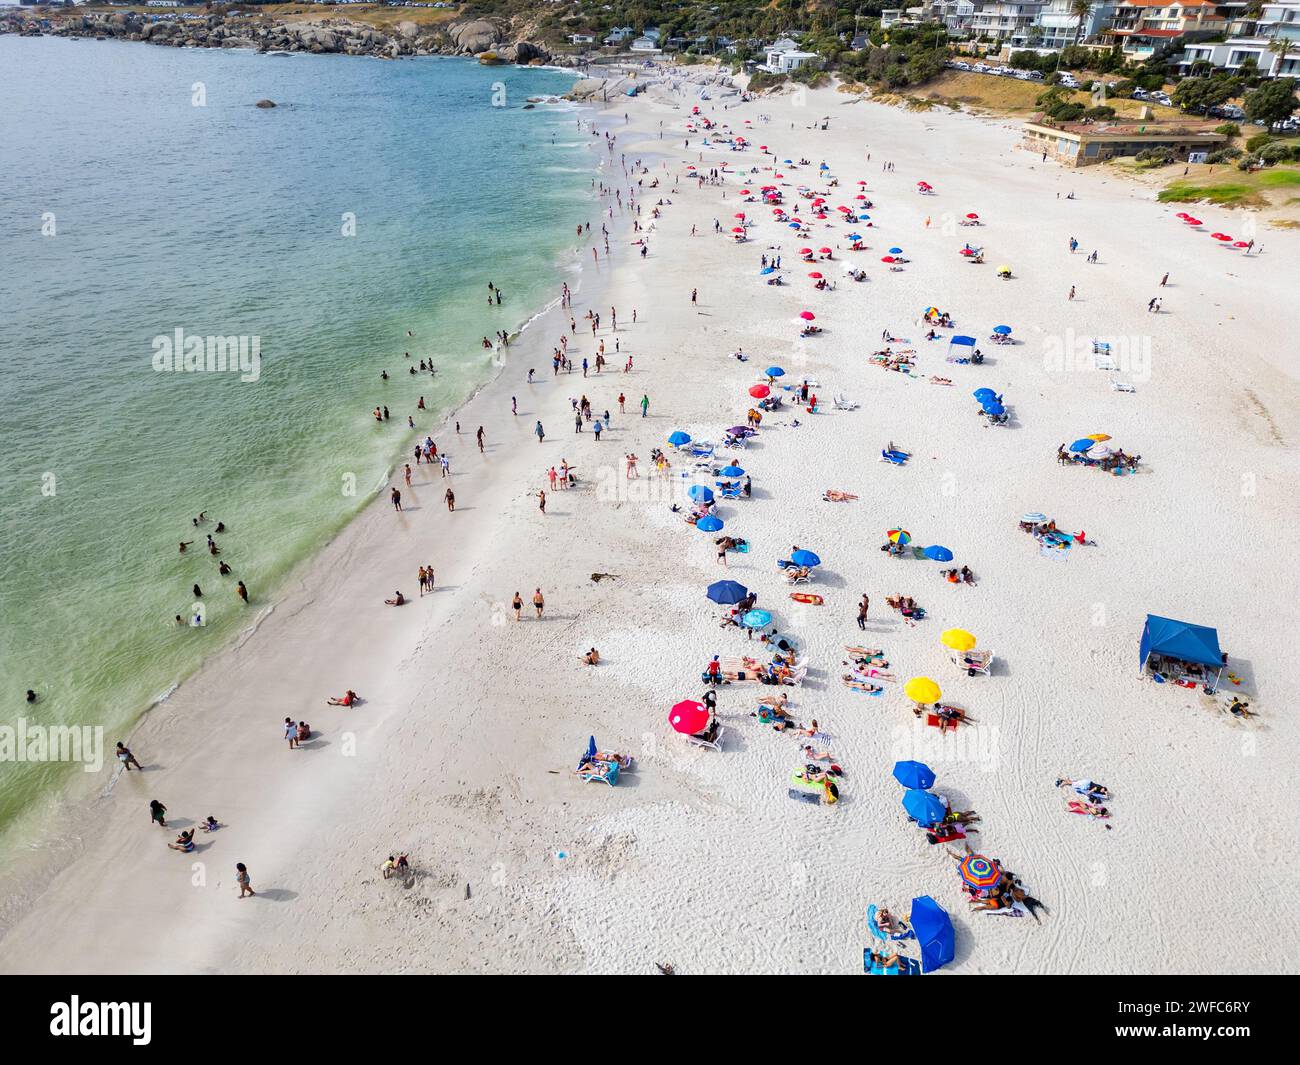 Camps Bay Beach, Camps Bay, Cape Town, South Africa Stock Photo